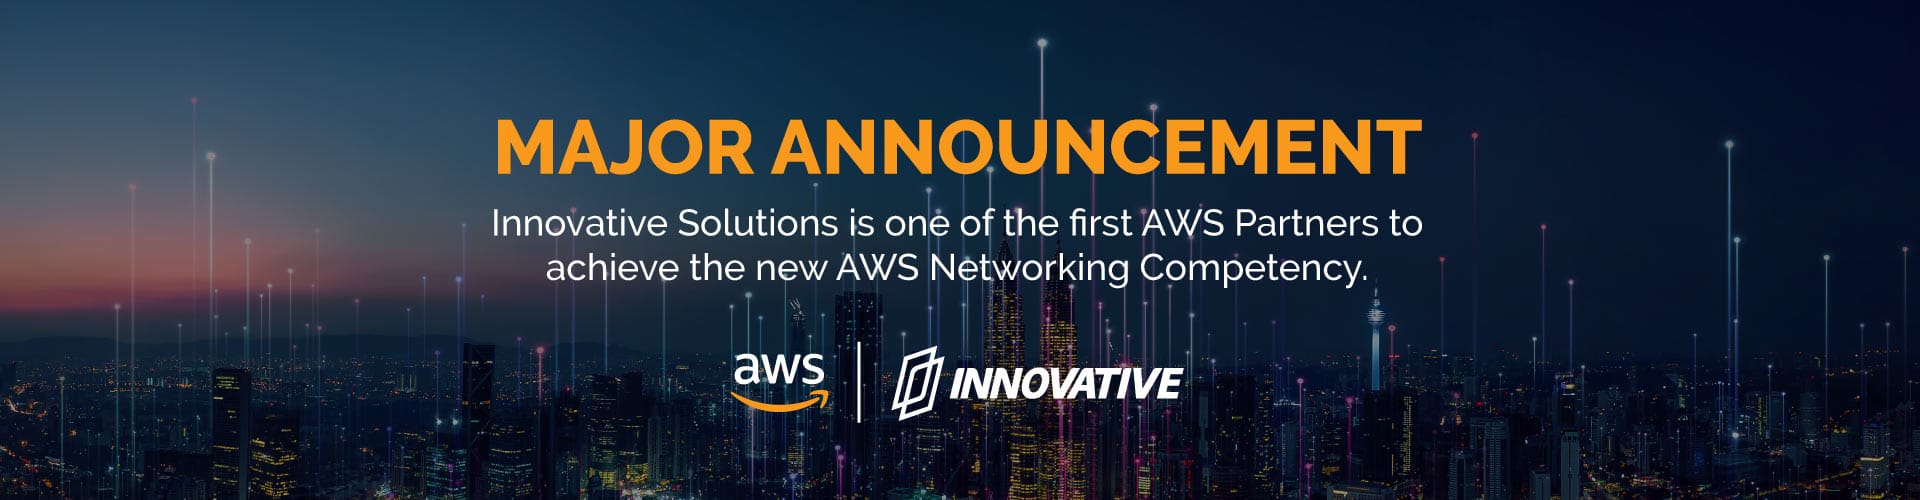 Innovative Solutions achieves the new AWS Networking Competency